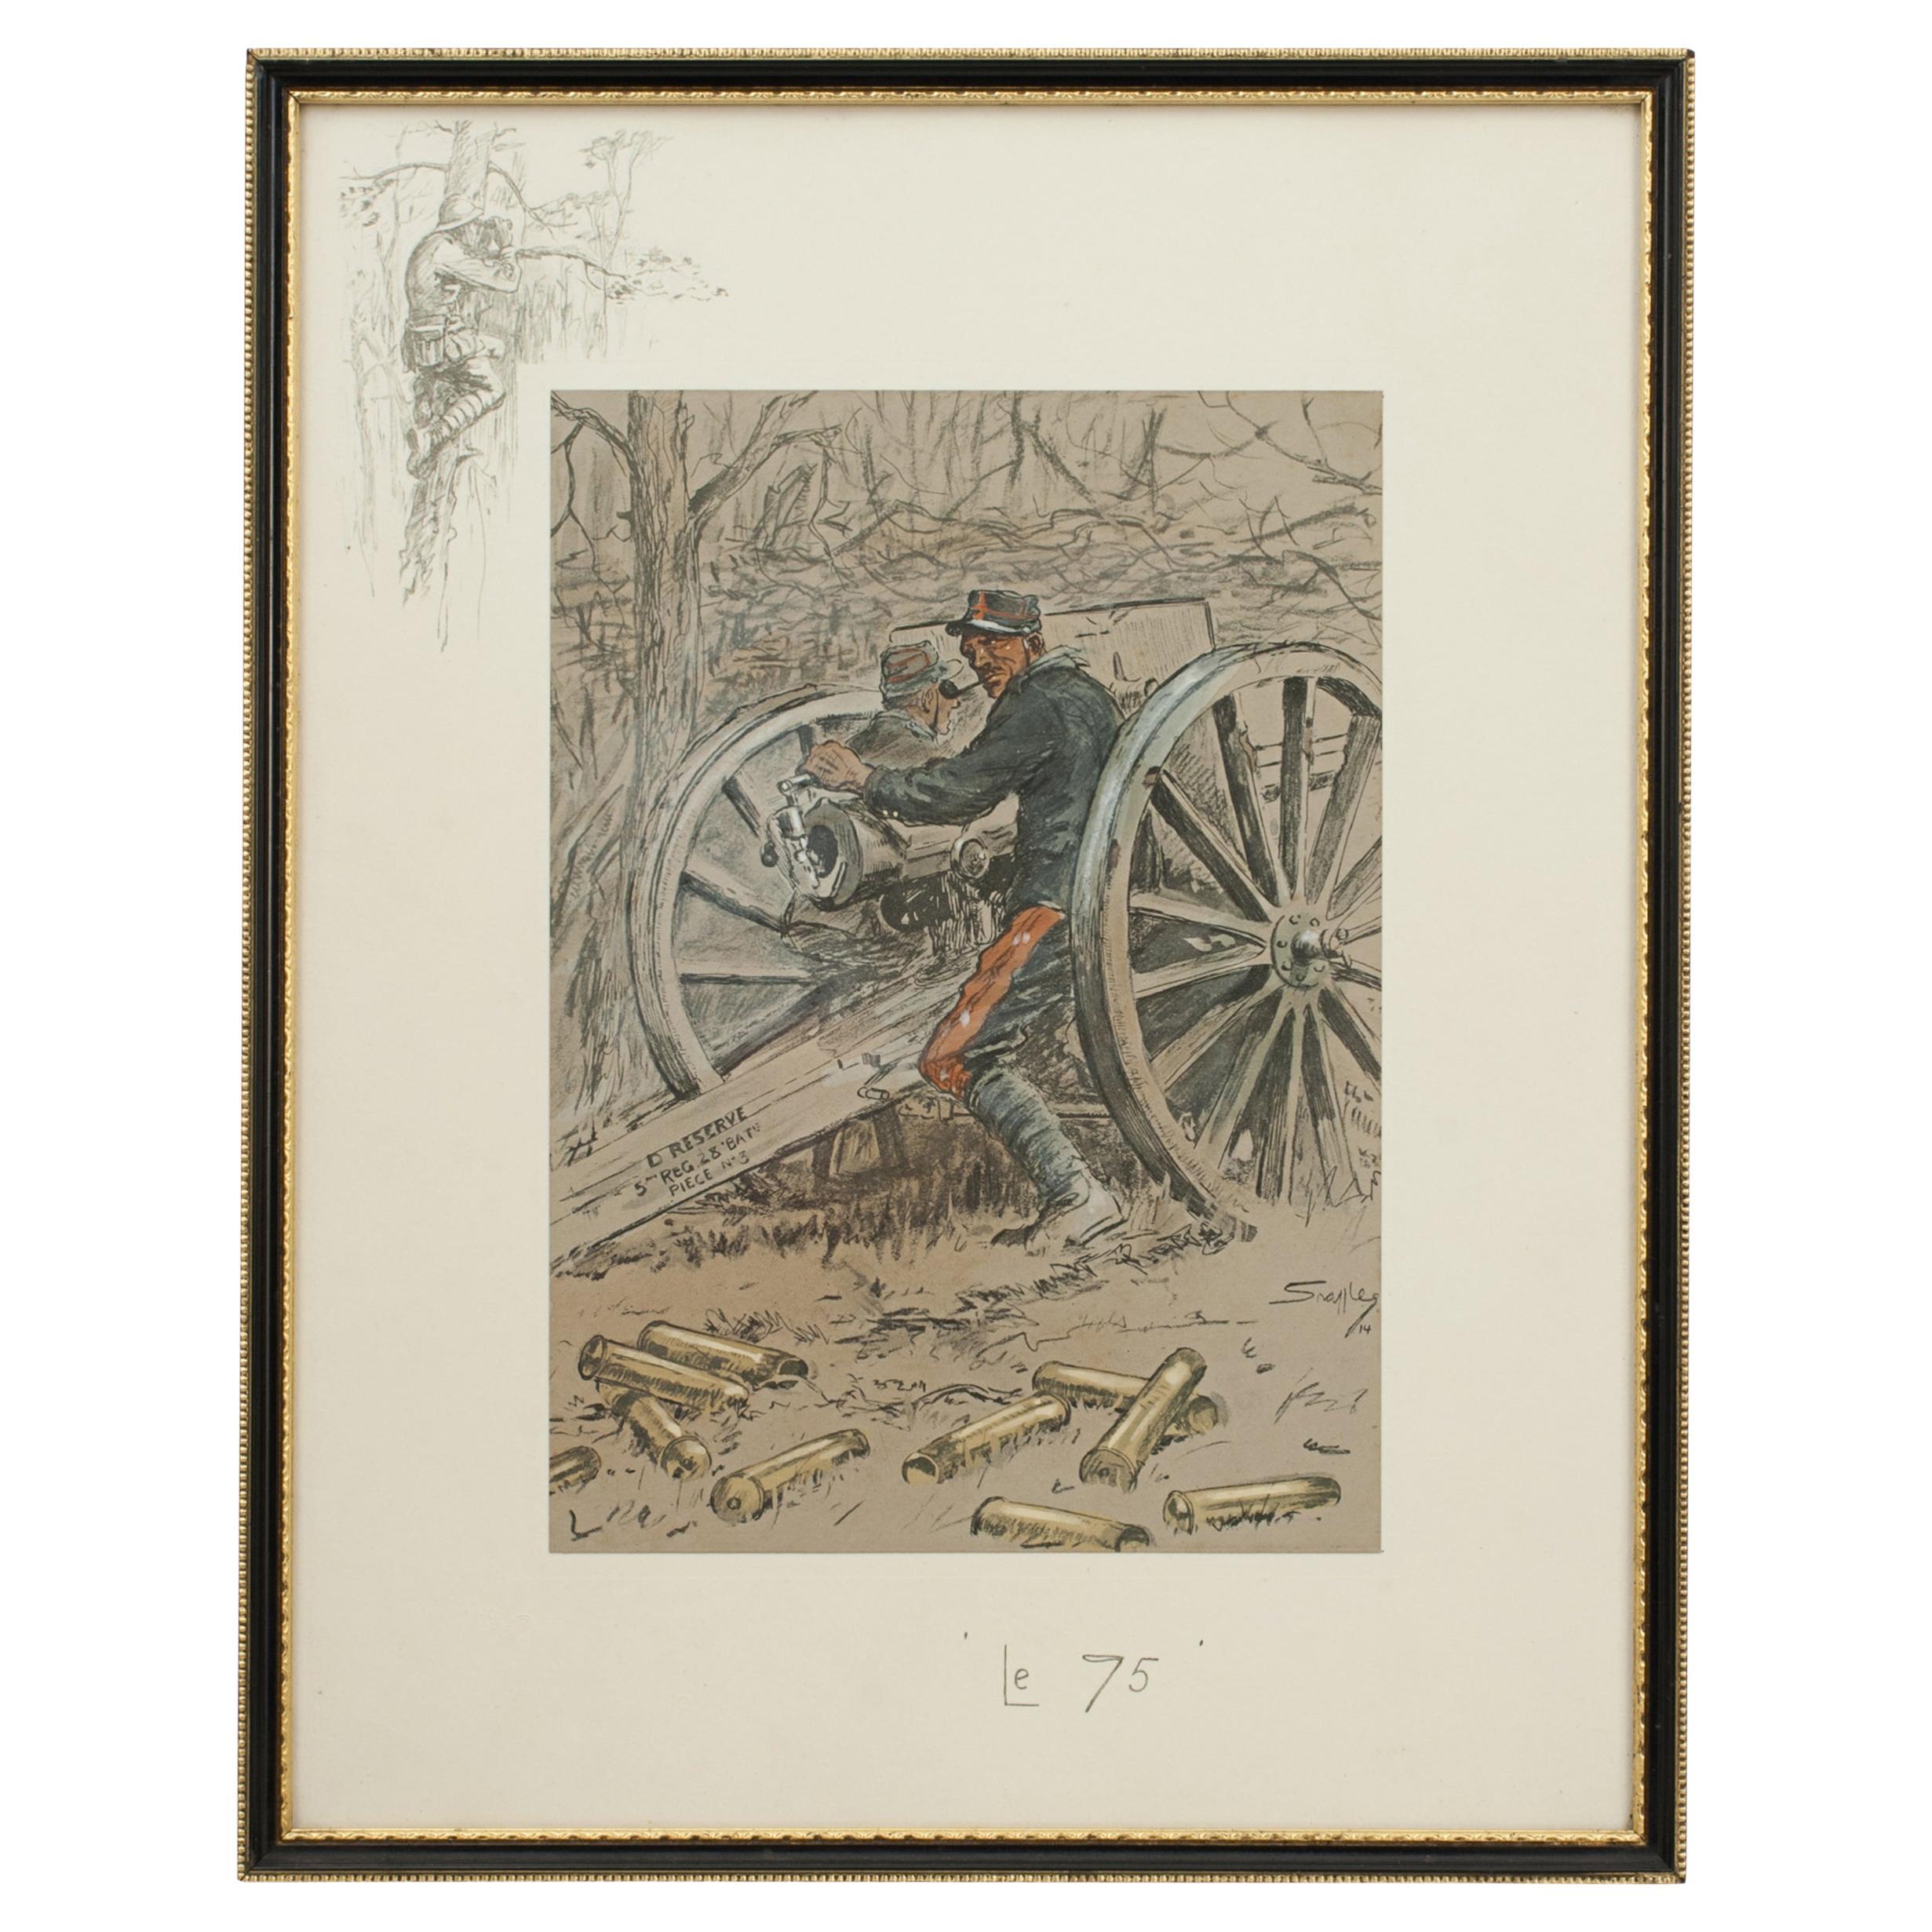 Snaffles WW1 Military Lithograph, 'le 75' Military Print. For Sale